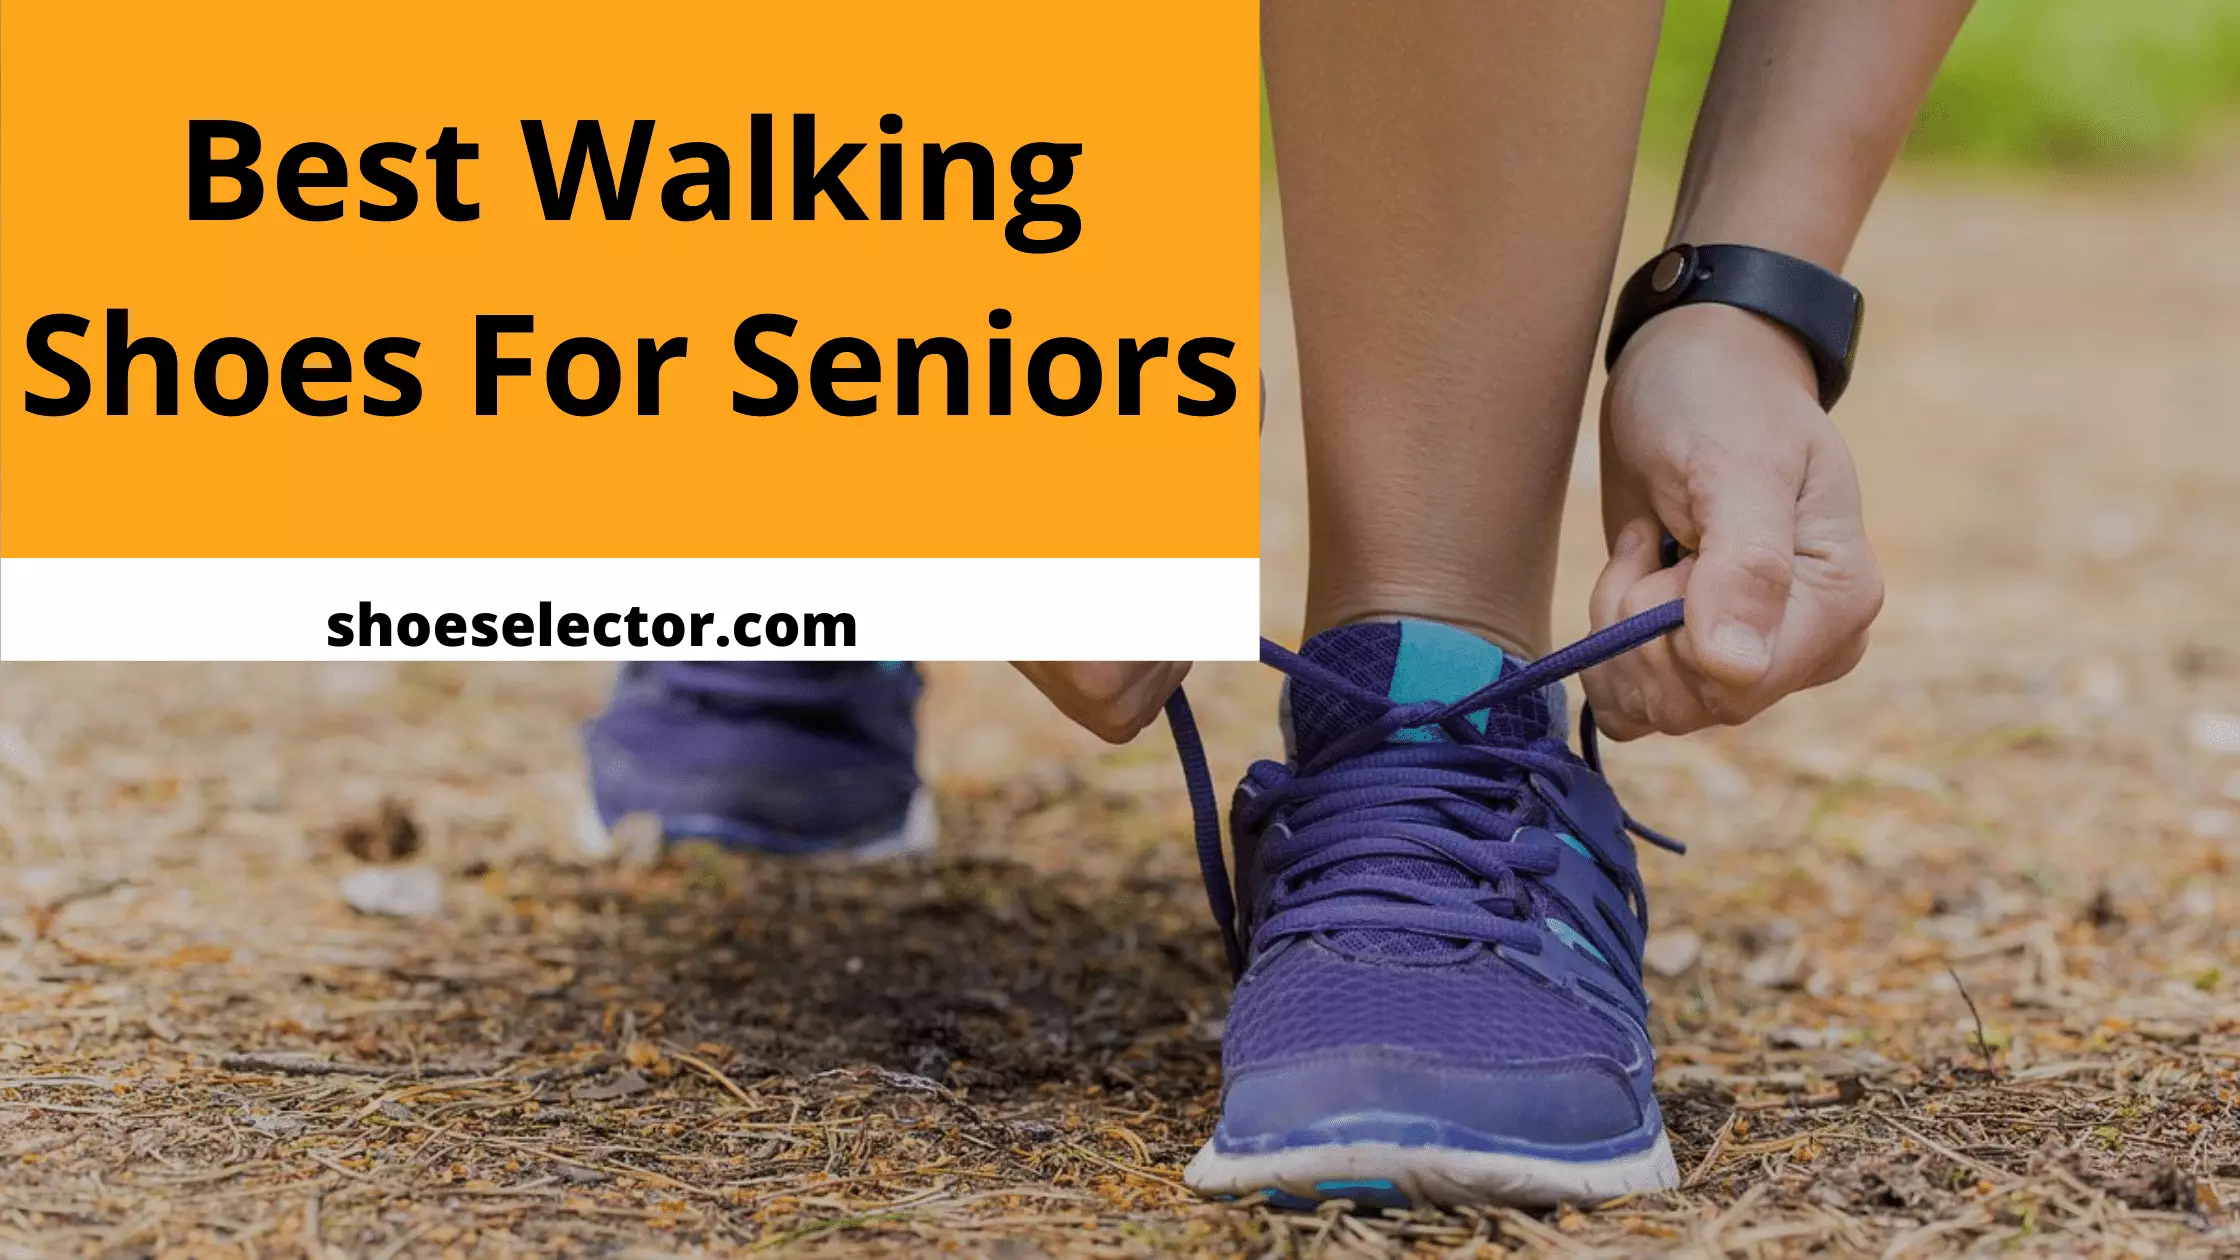 Best Walking Shoes For Seniors - Ultimate Guide